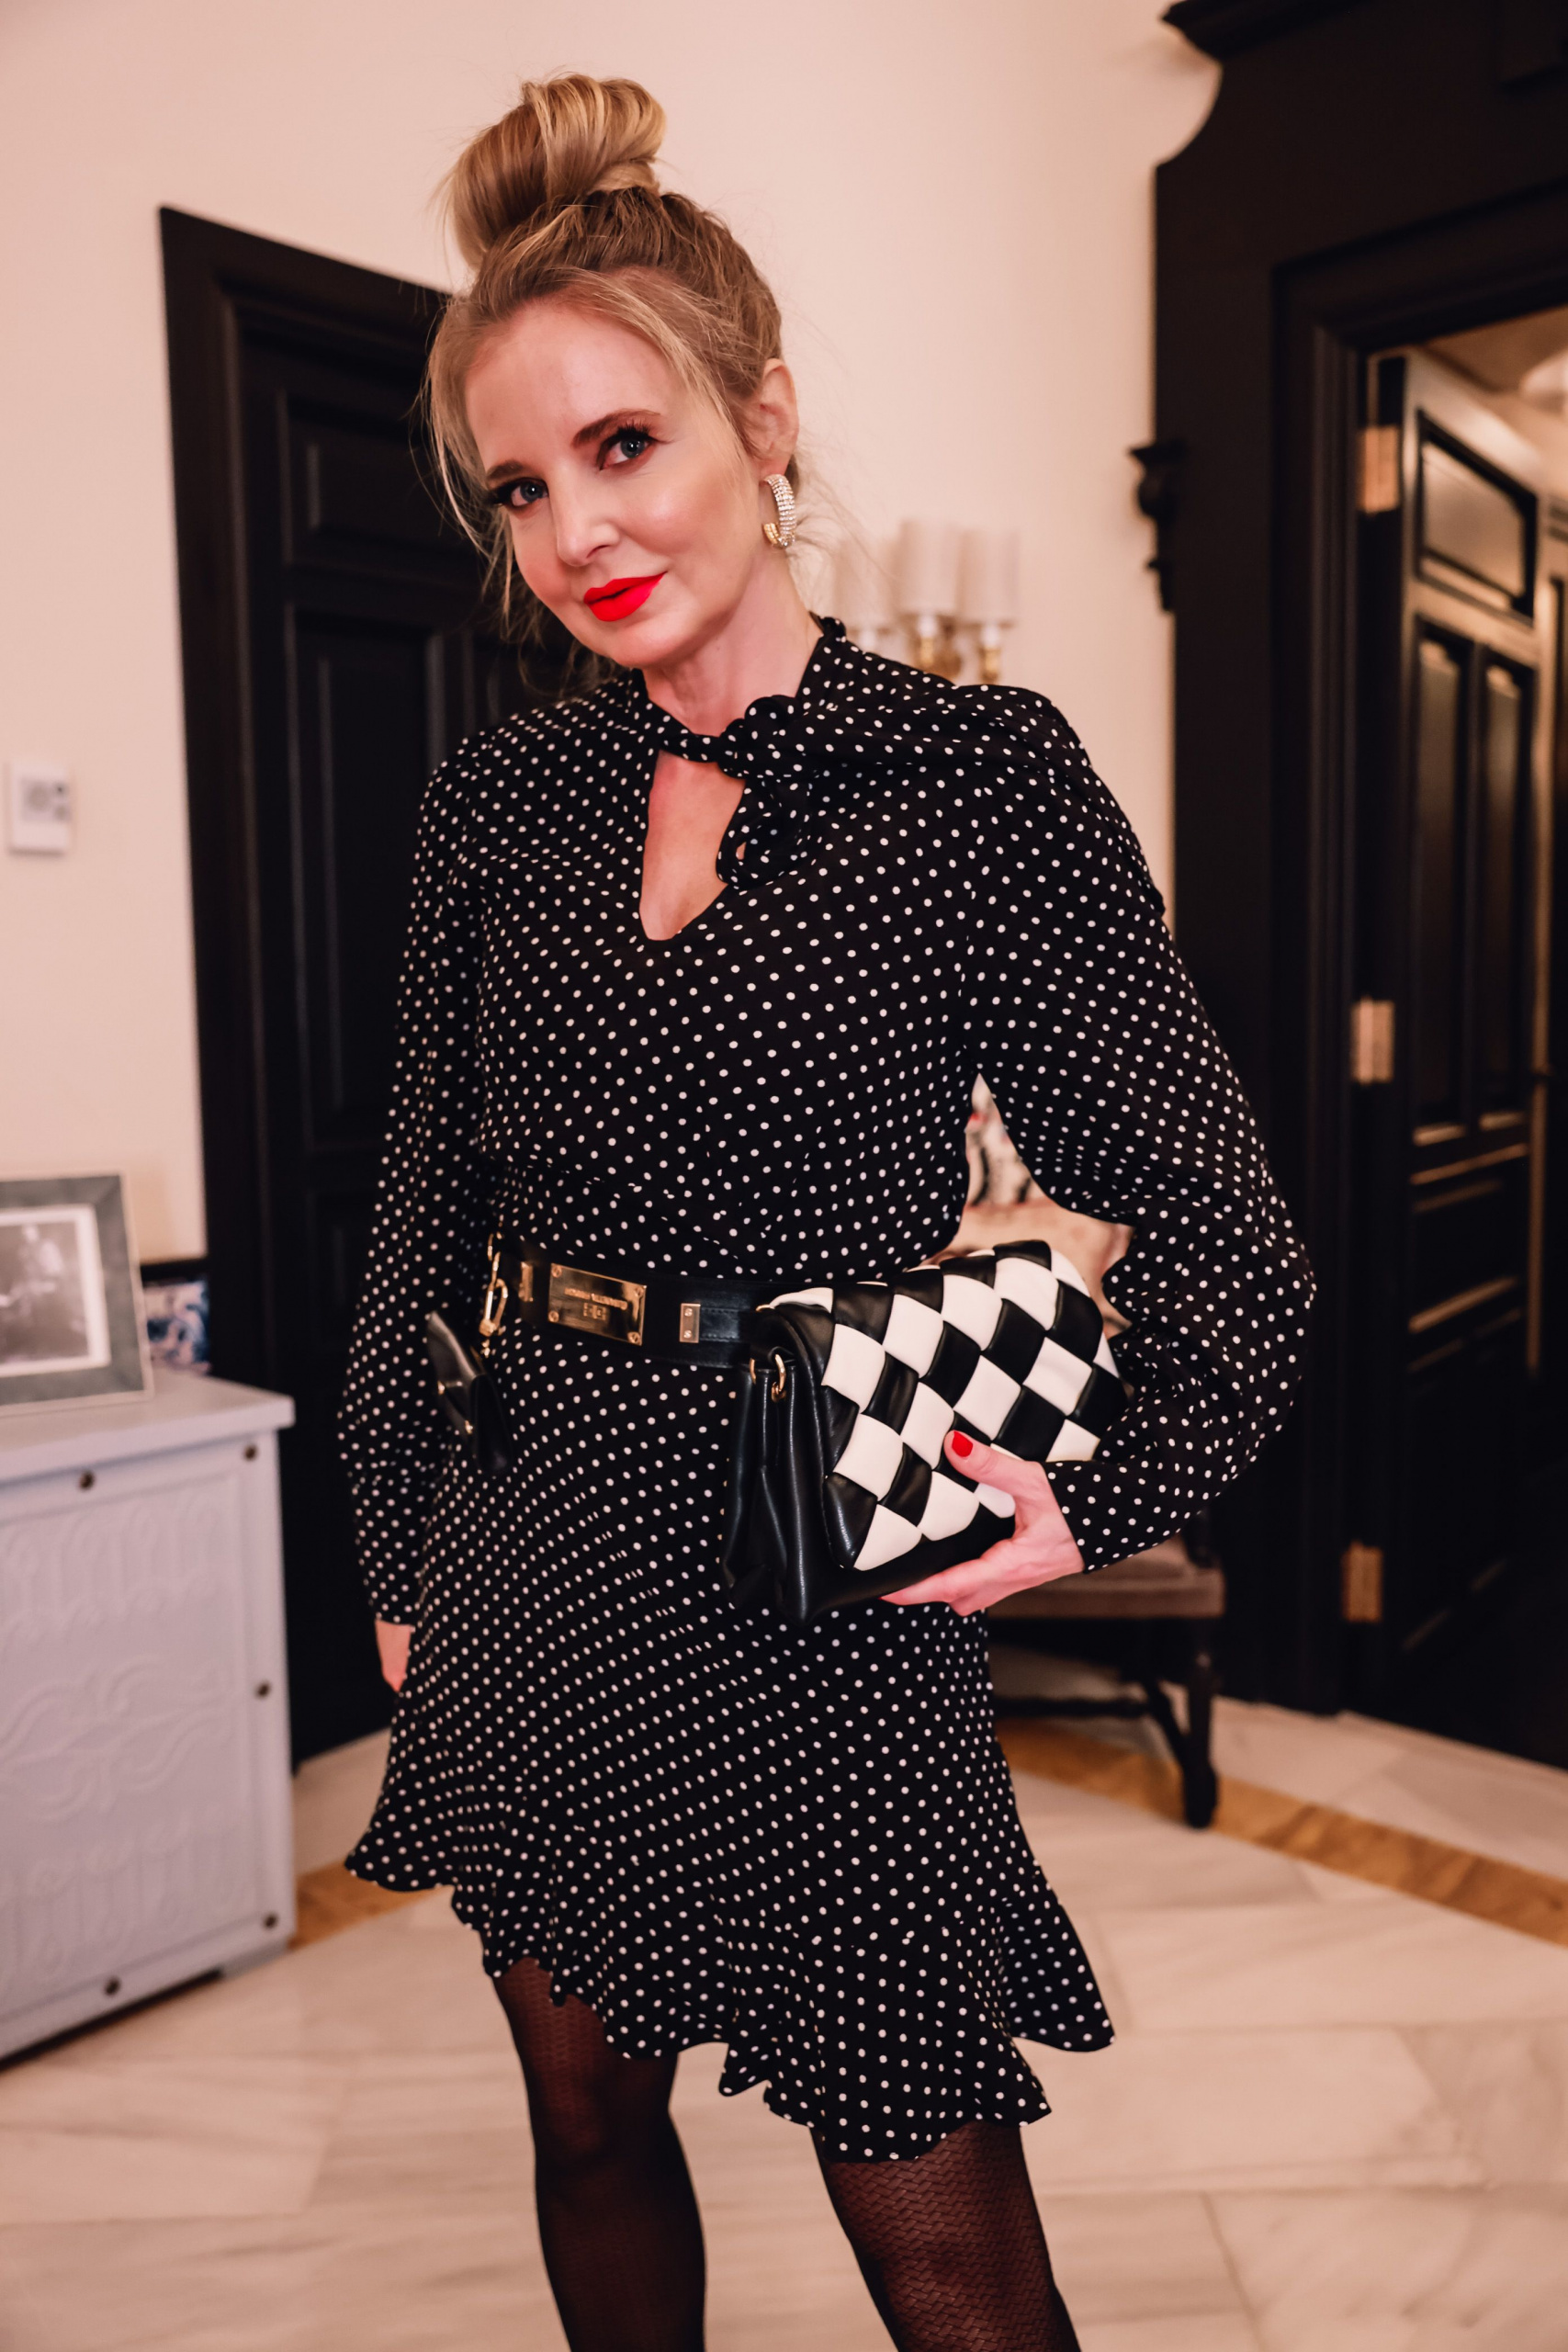 rin busbee, patterned tights, polka dot dress, schutz bette boots, black and white check mango bag, Hotel Alfonso XIII, office to date night outfit, office to date night dresses